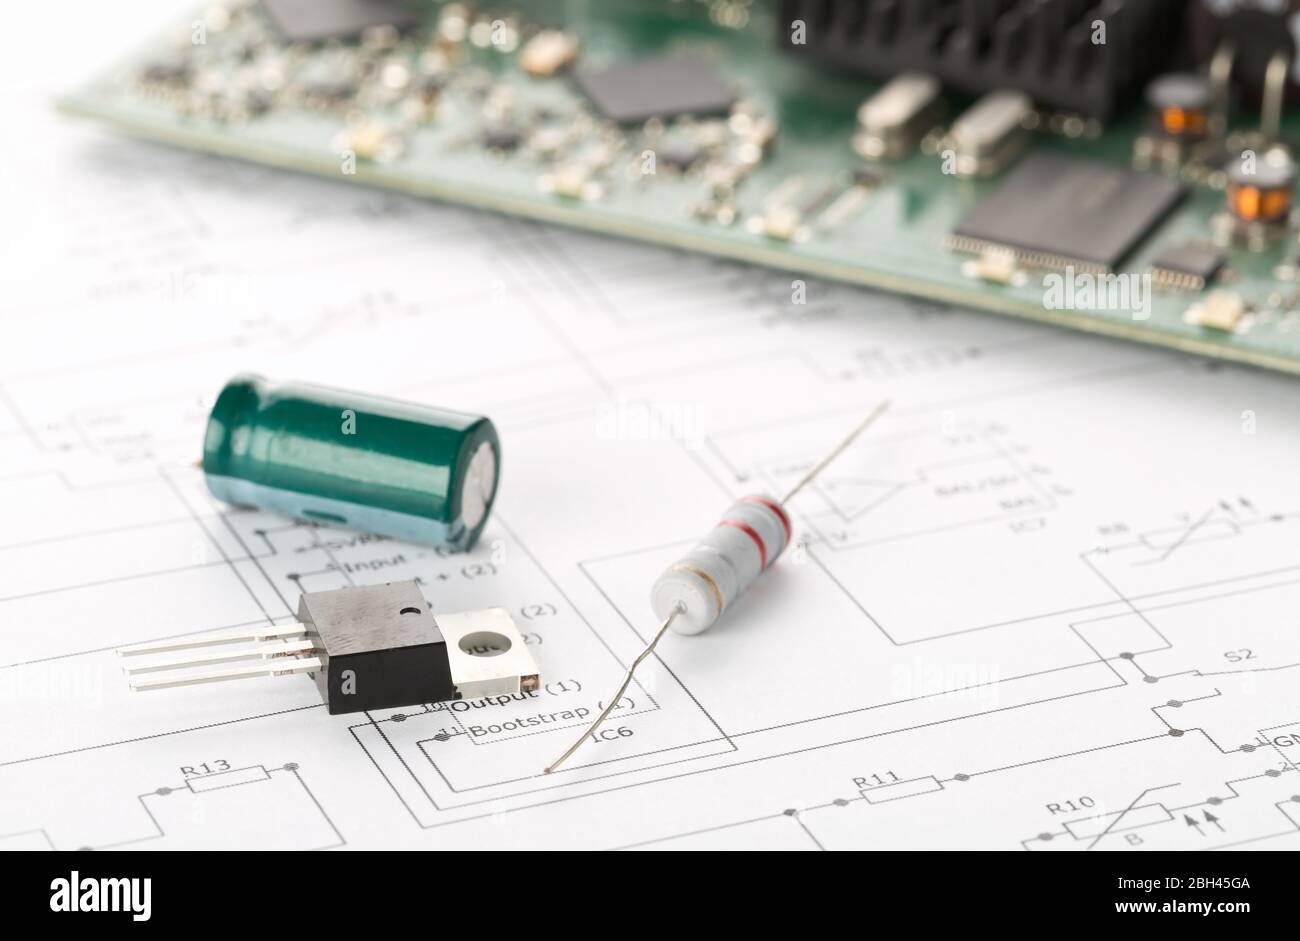 Transistor, resistor and capacitor electronic parts or components in front of pcb board with pcb wiring diagram - electronic device repair concept, se Stock Photo